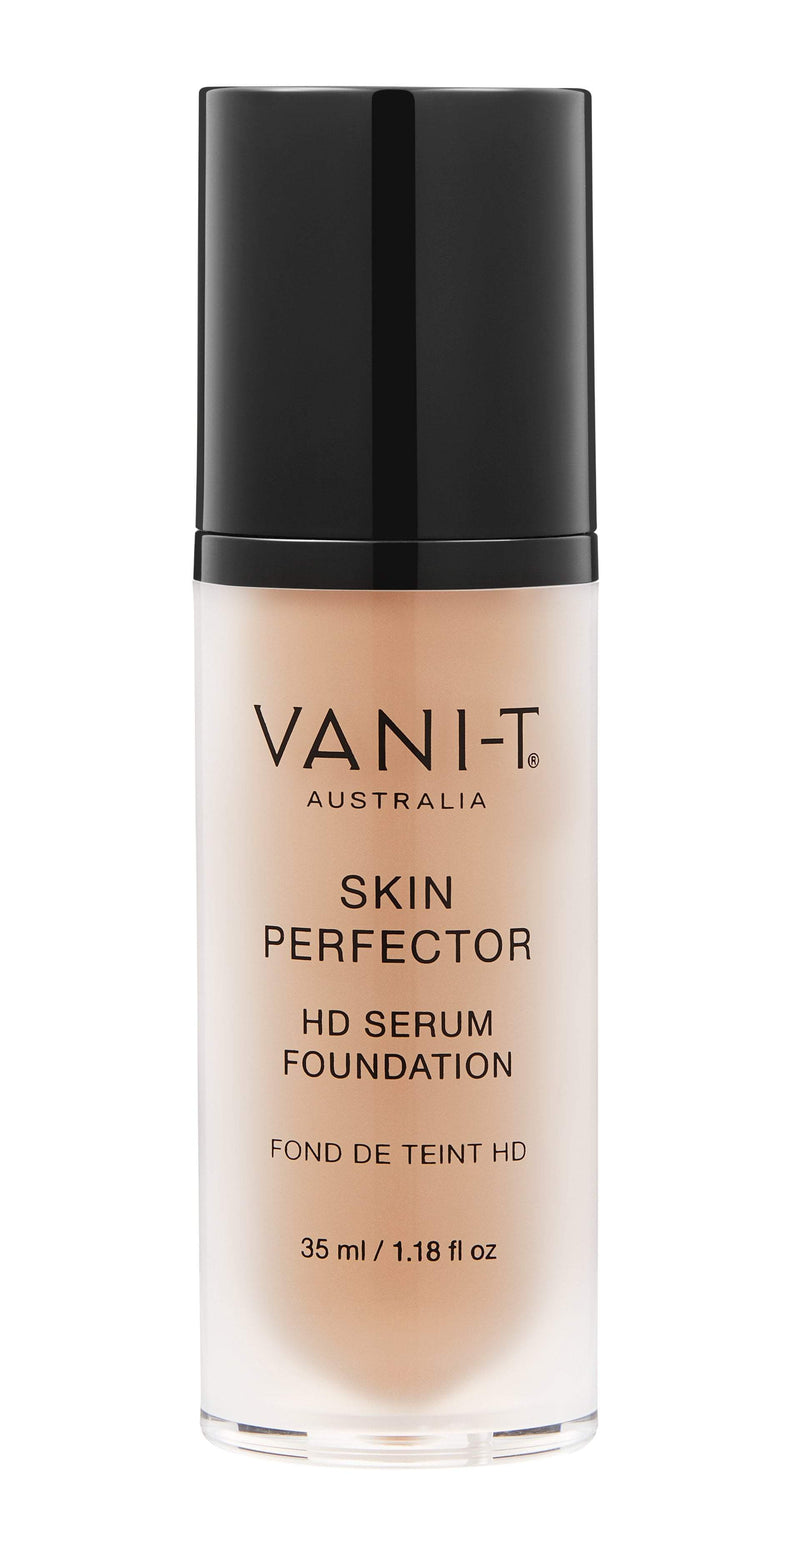 VANI-T Skin Perfector HD Serum Foundation - available in 11 colours - Salon Style